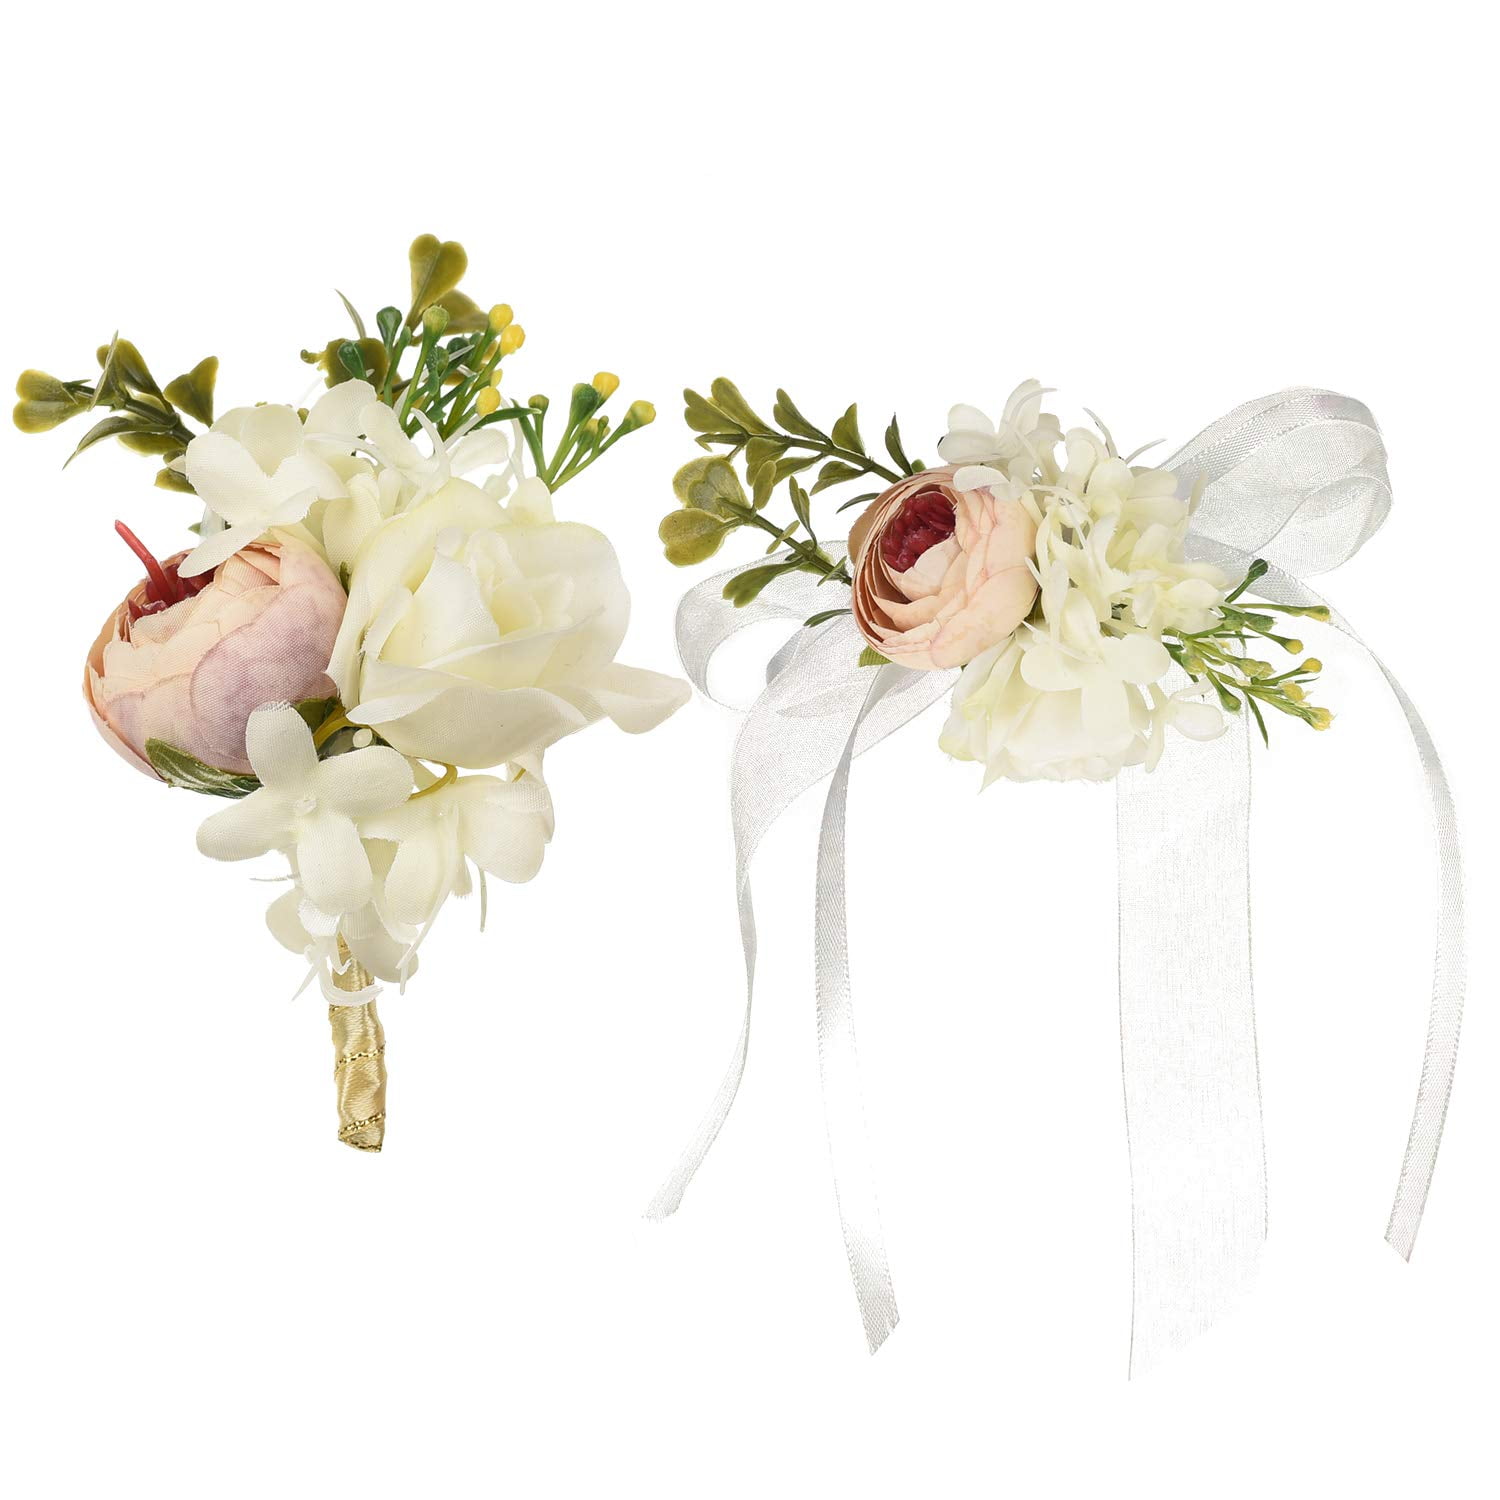 White Wrist Corsage Band Bridal Roses Flower Groom Boutonniere for Men Wedding 